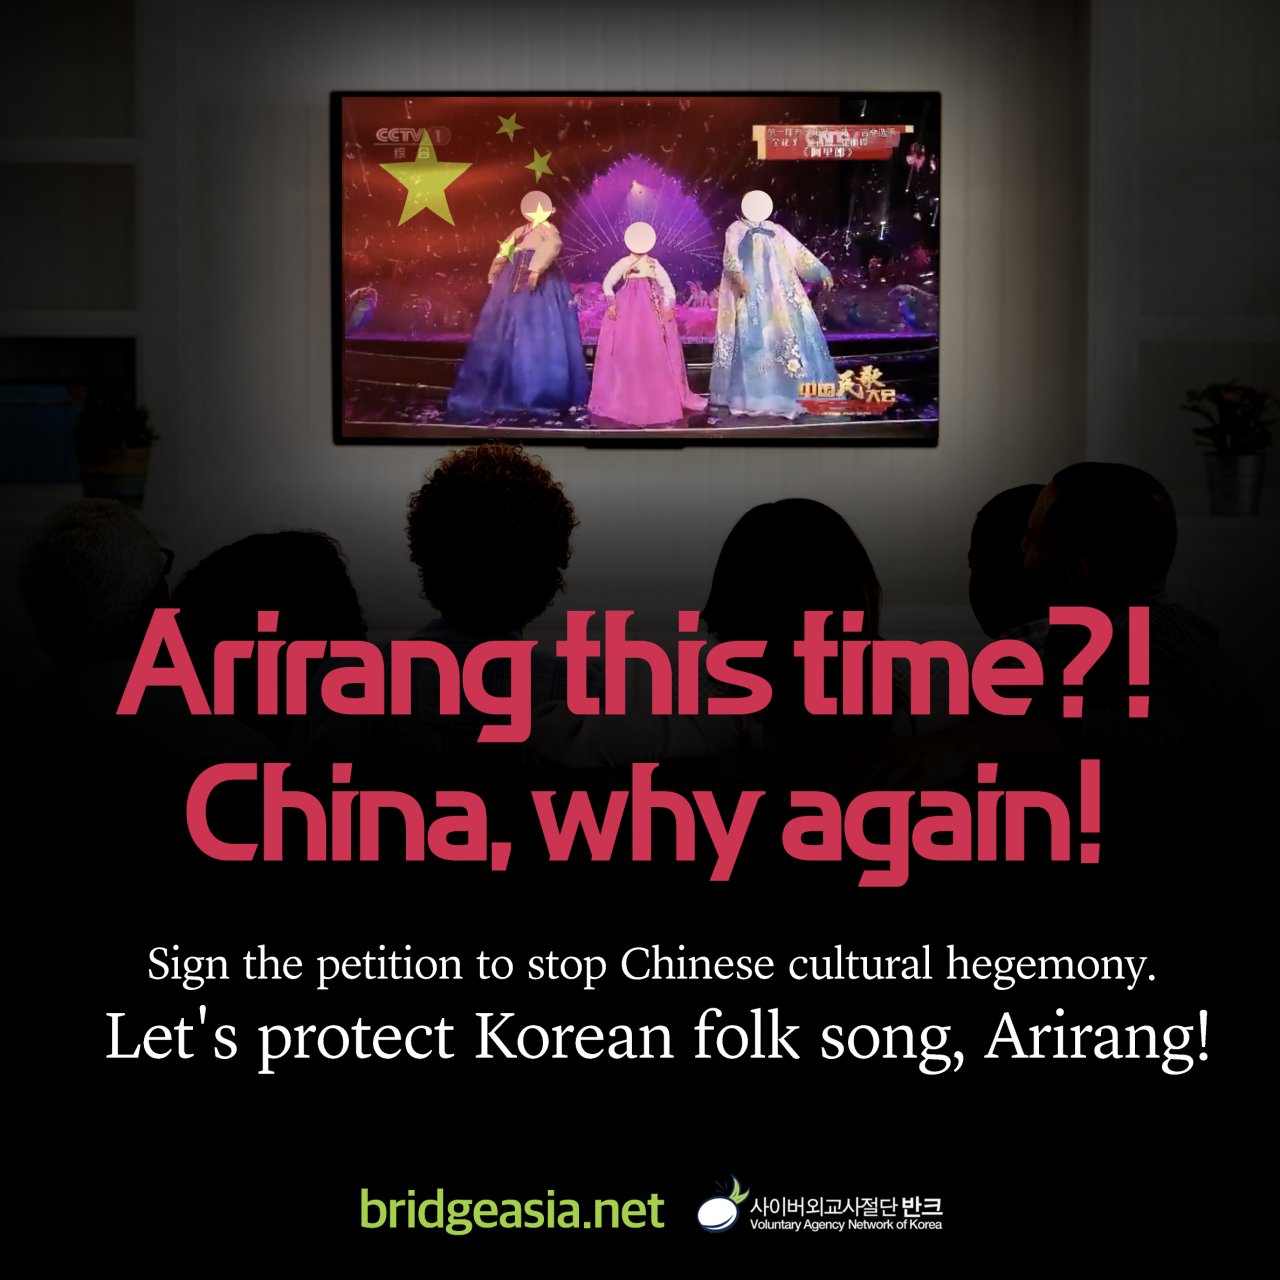 The English version of petition poster “Arirang this time?! China why again!” released by VANK (Voluntary Agency Network of Korea)